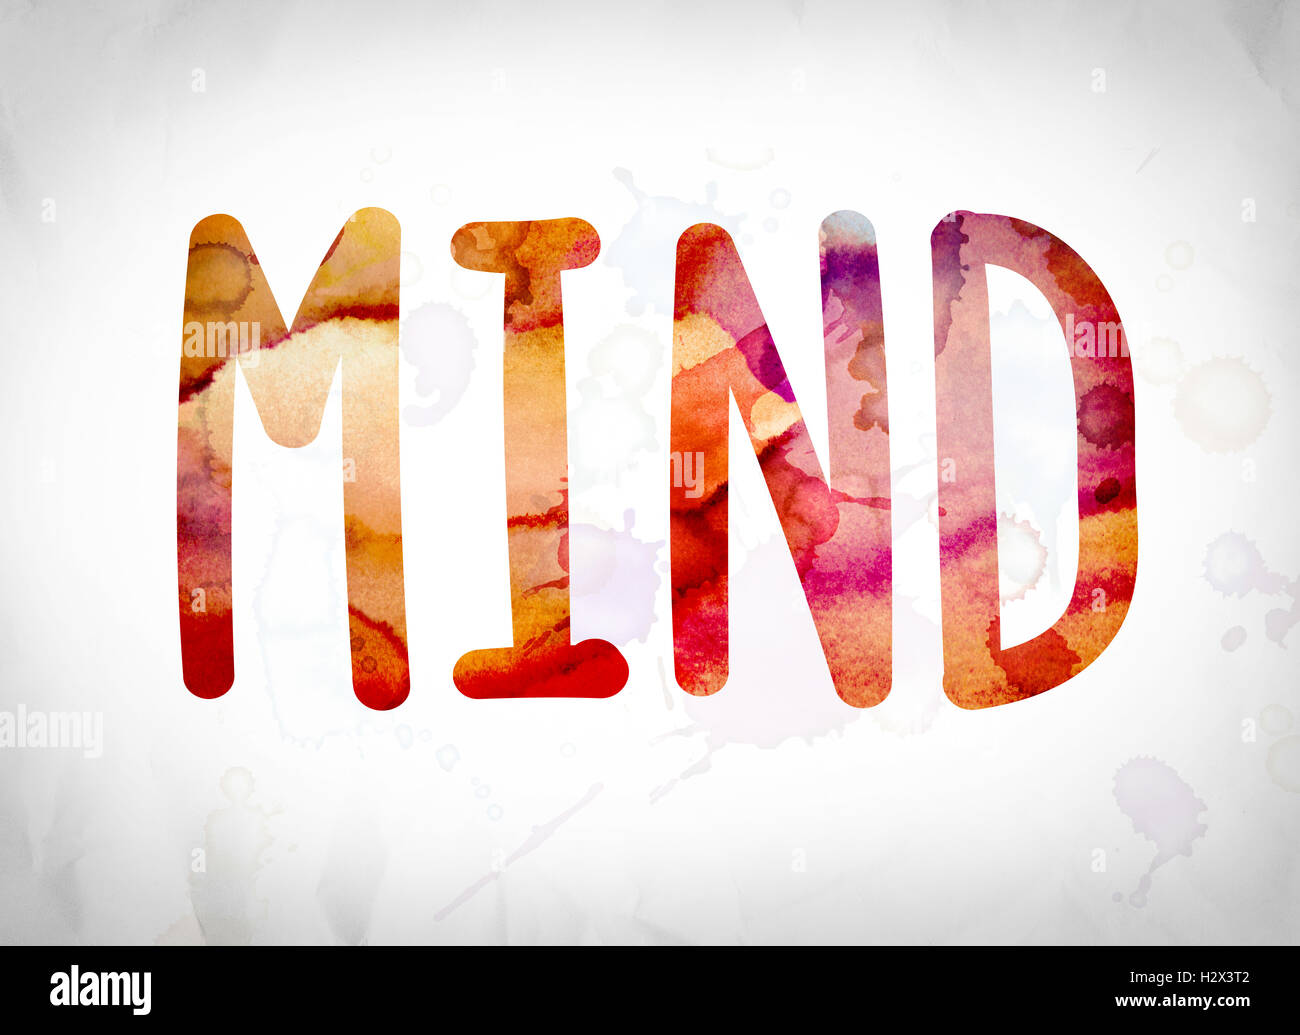 The word "Mind" written in watercolor washes over a white paper background concept and theme. Stock Photo